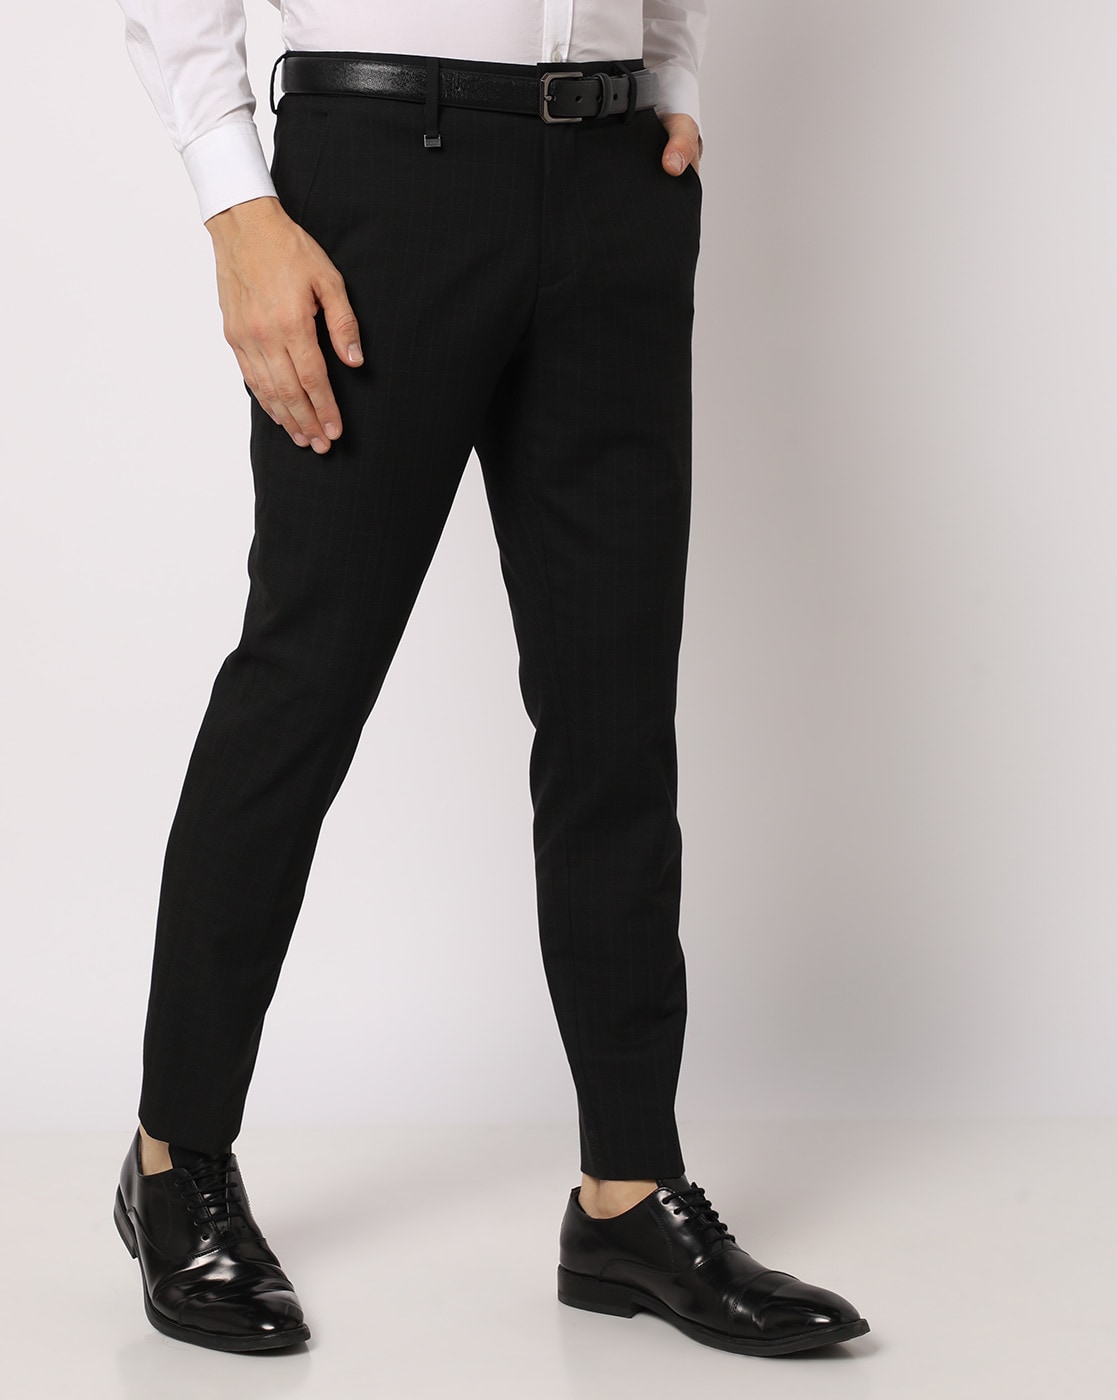 Buy Boss Slim Fit Stretch Trousers with Capsule Label  Black Color Men   AJIO LUXE